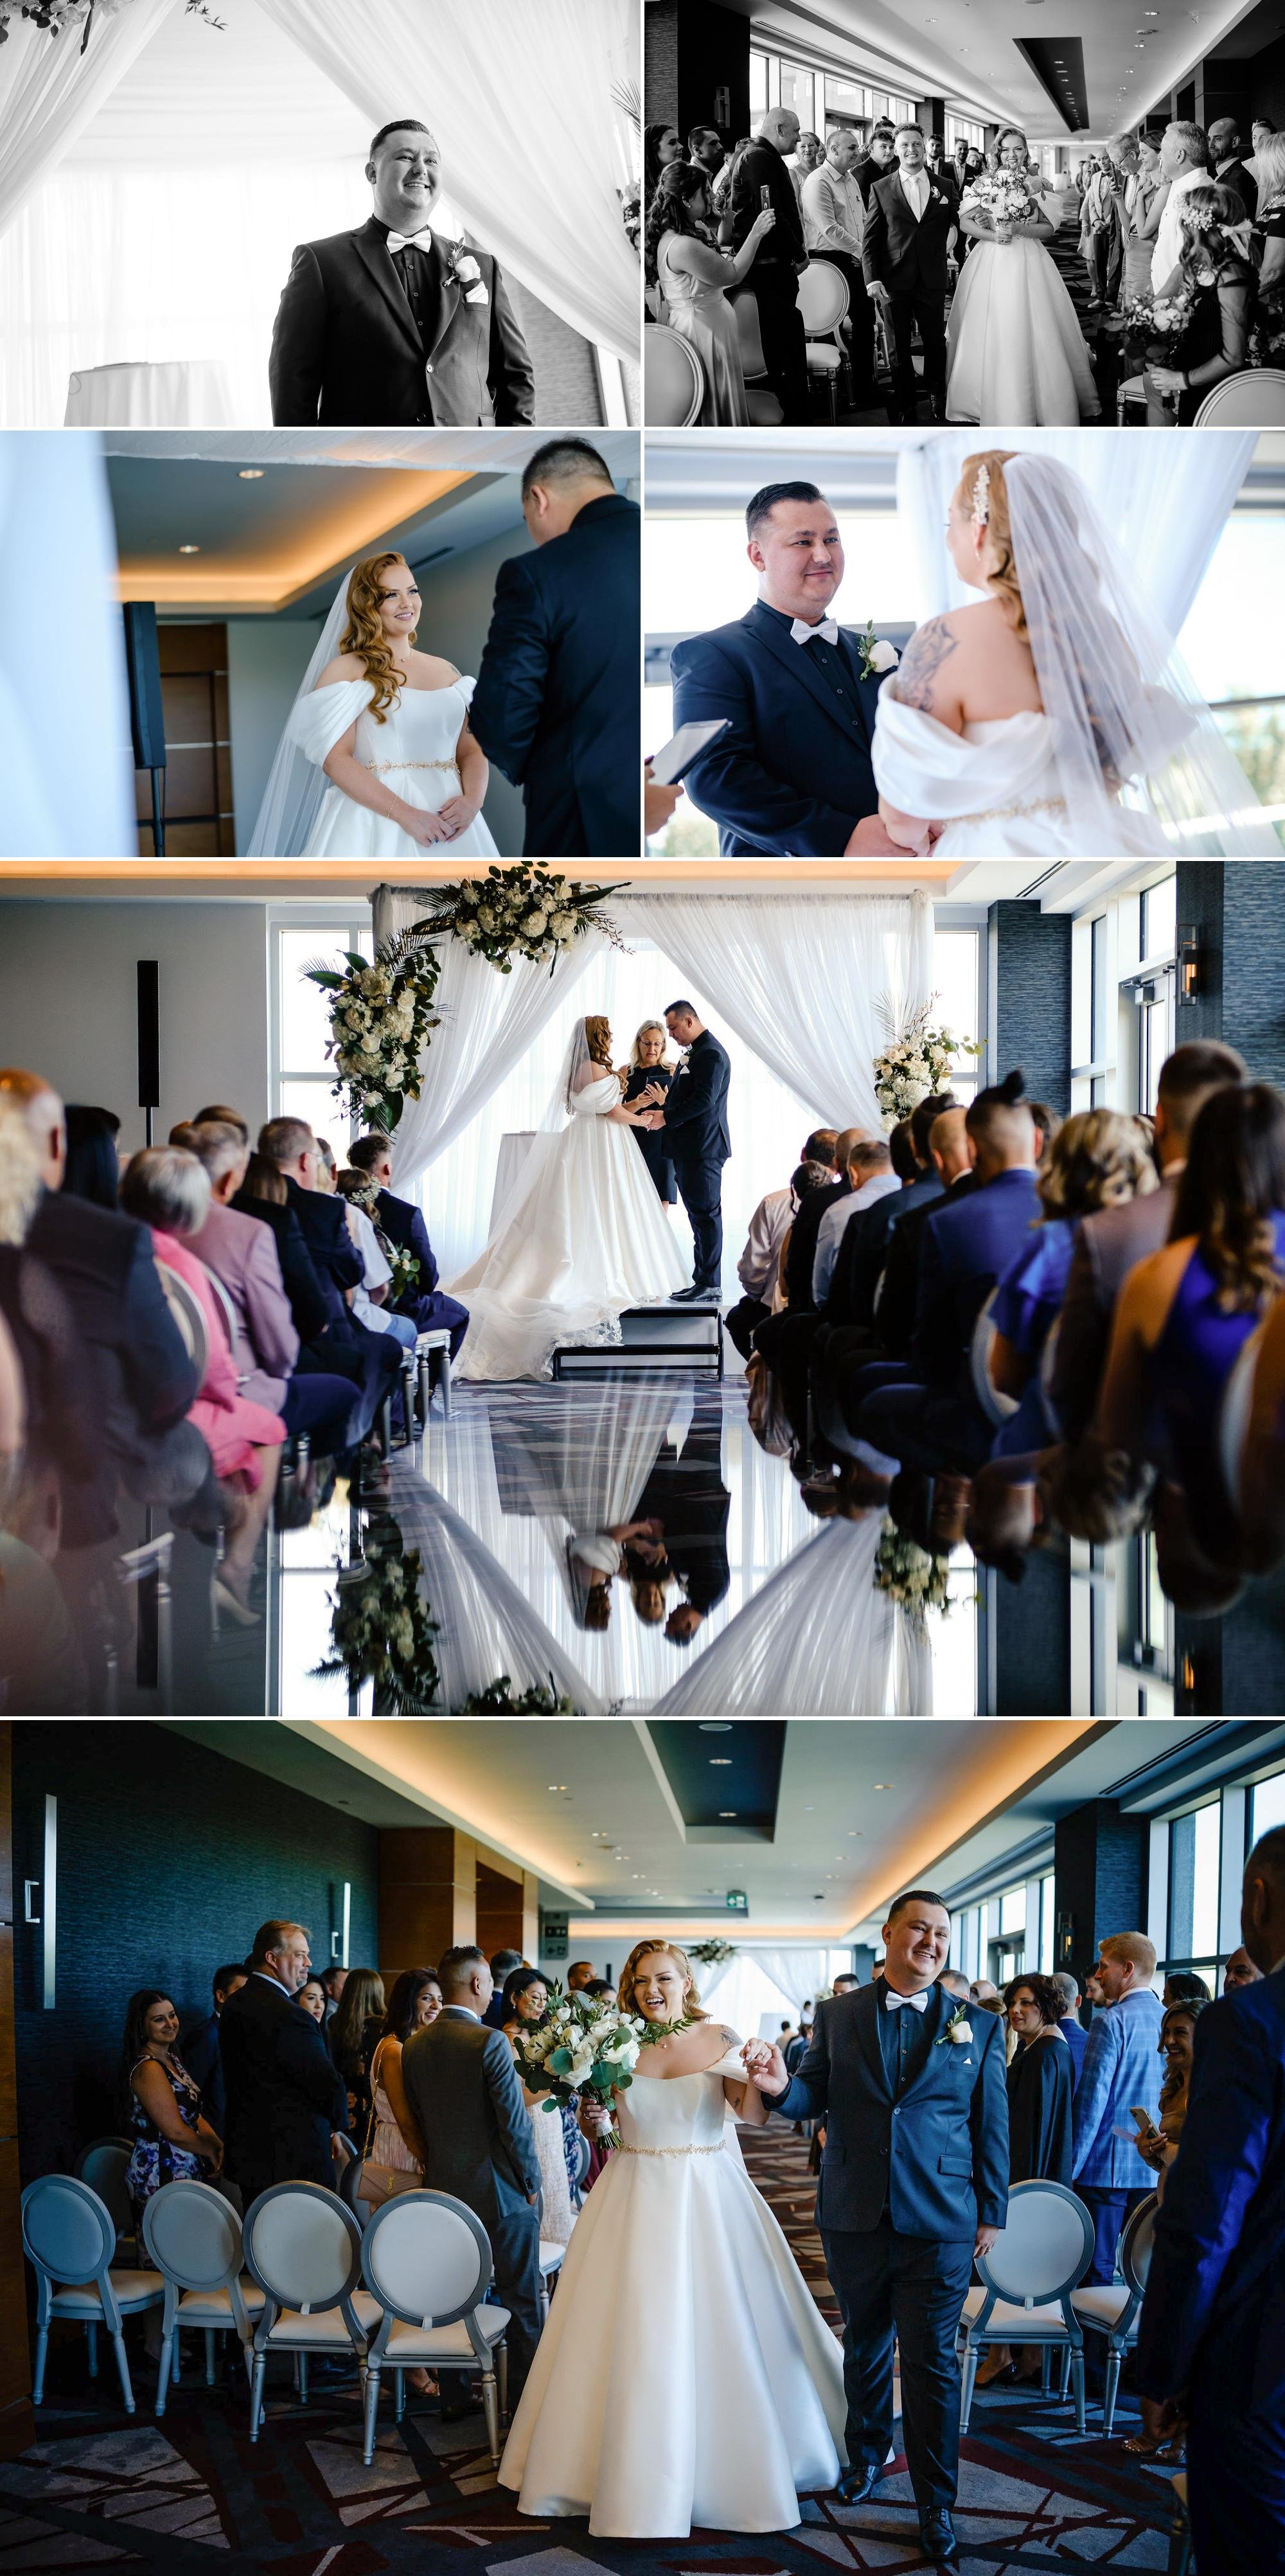 photos form a wedding ceremony at the Brookstreet hotel in ottawa